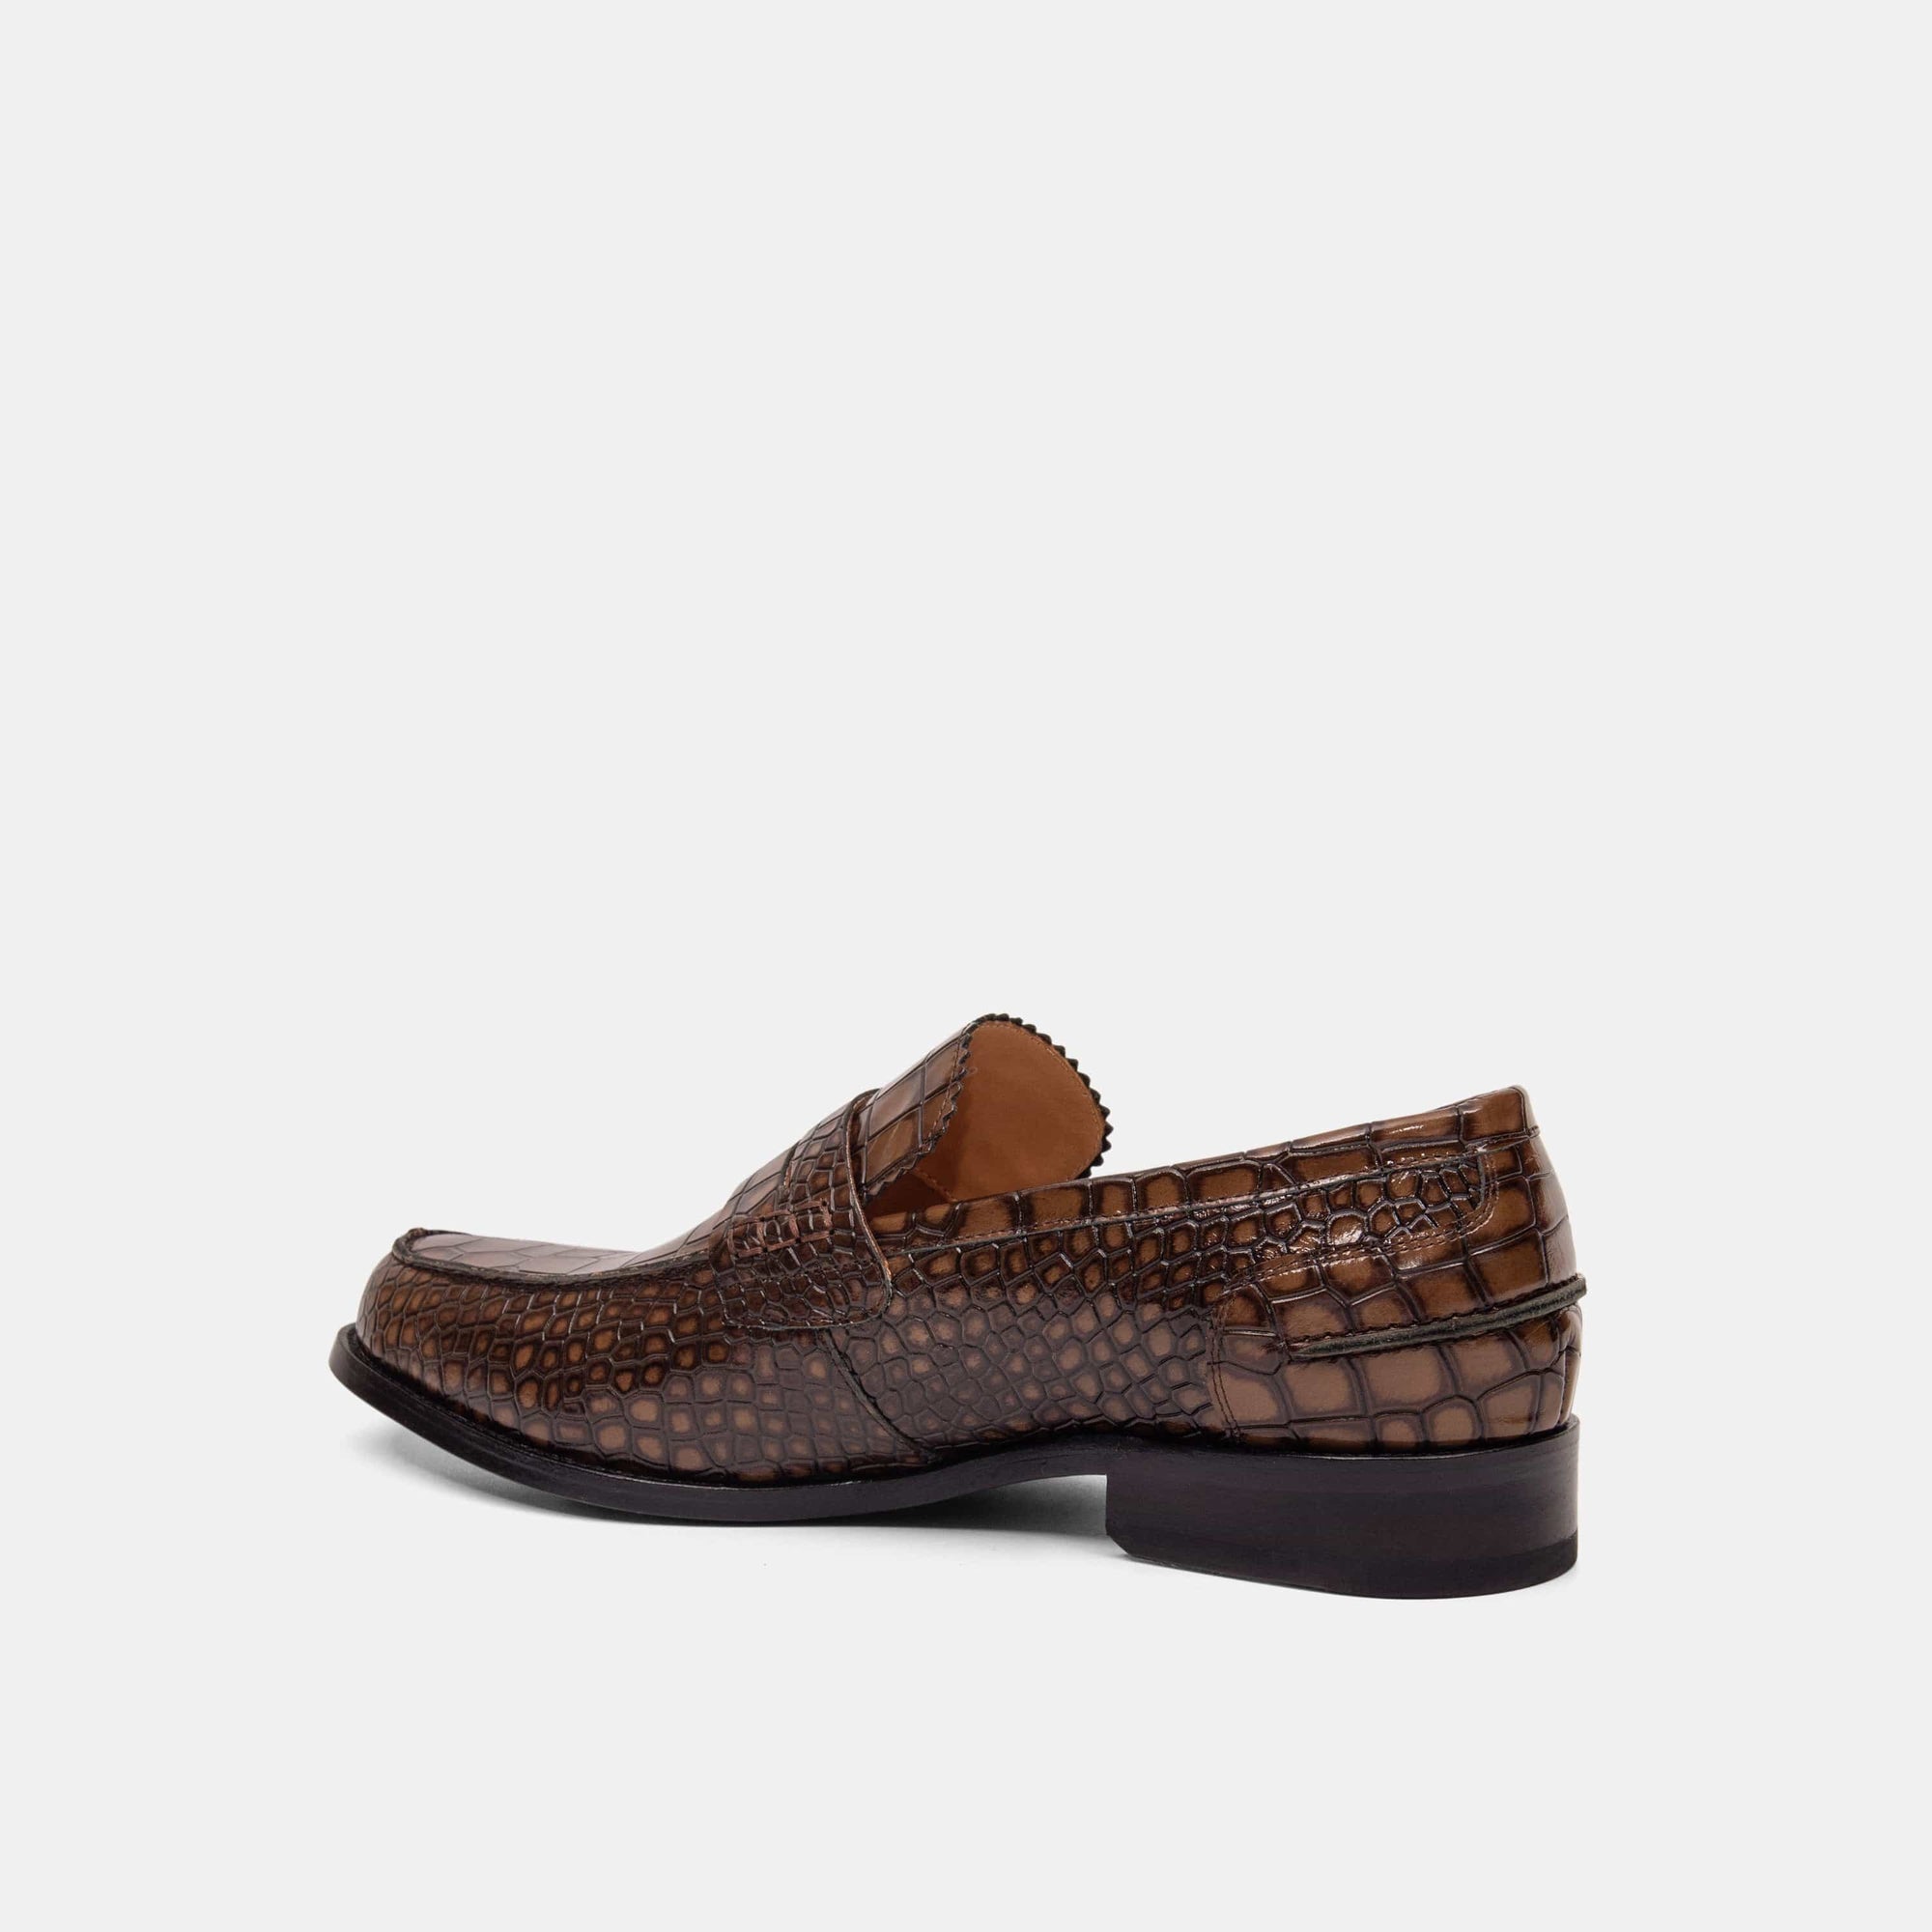 Abe Brown Crocskin Leather Penny Loafers